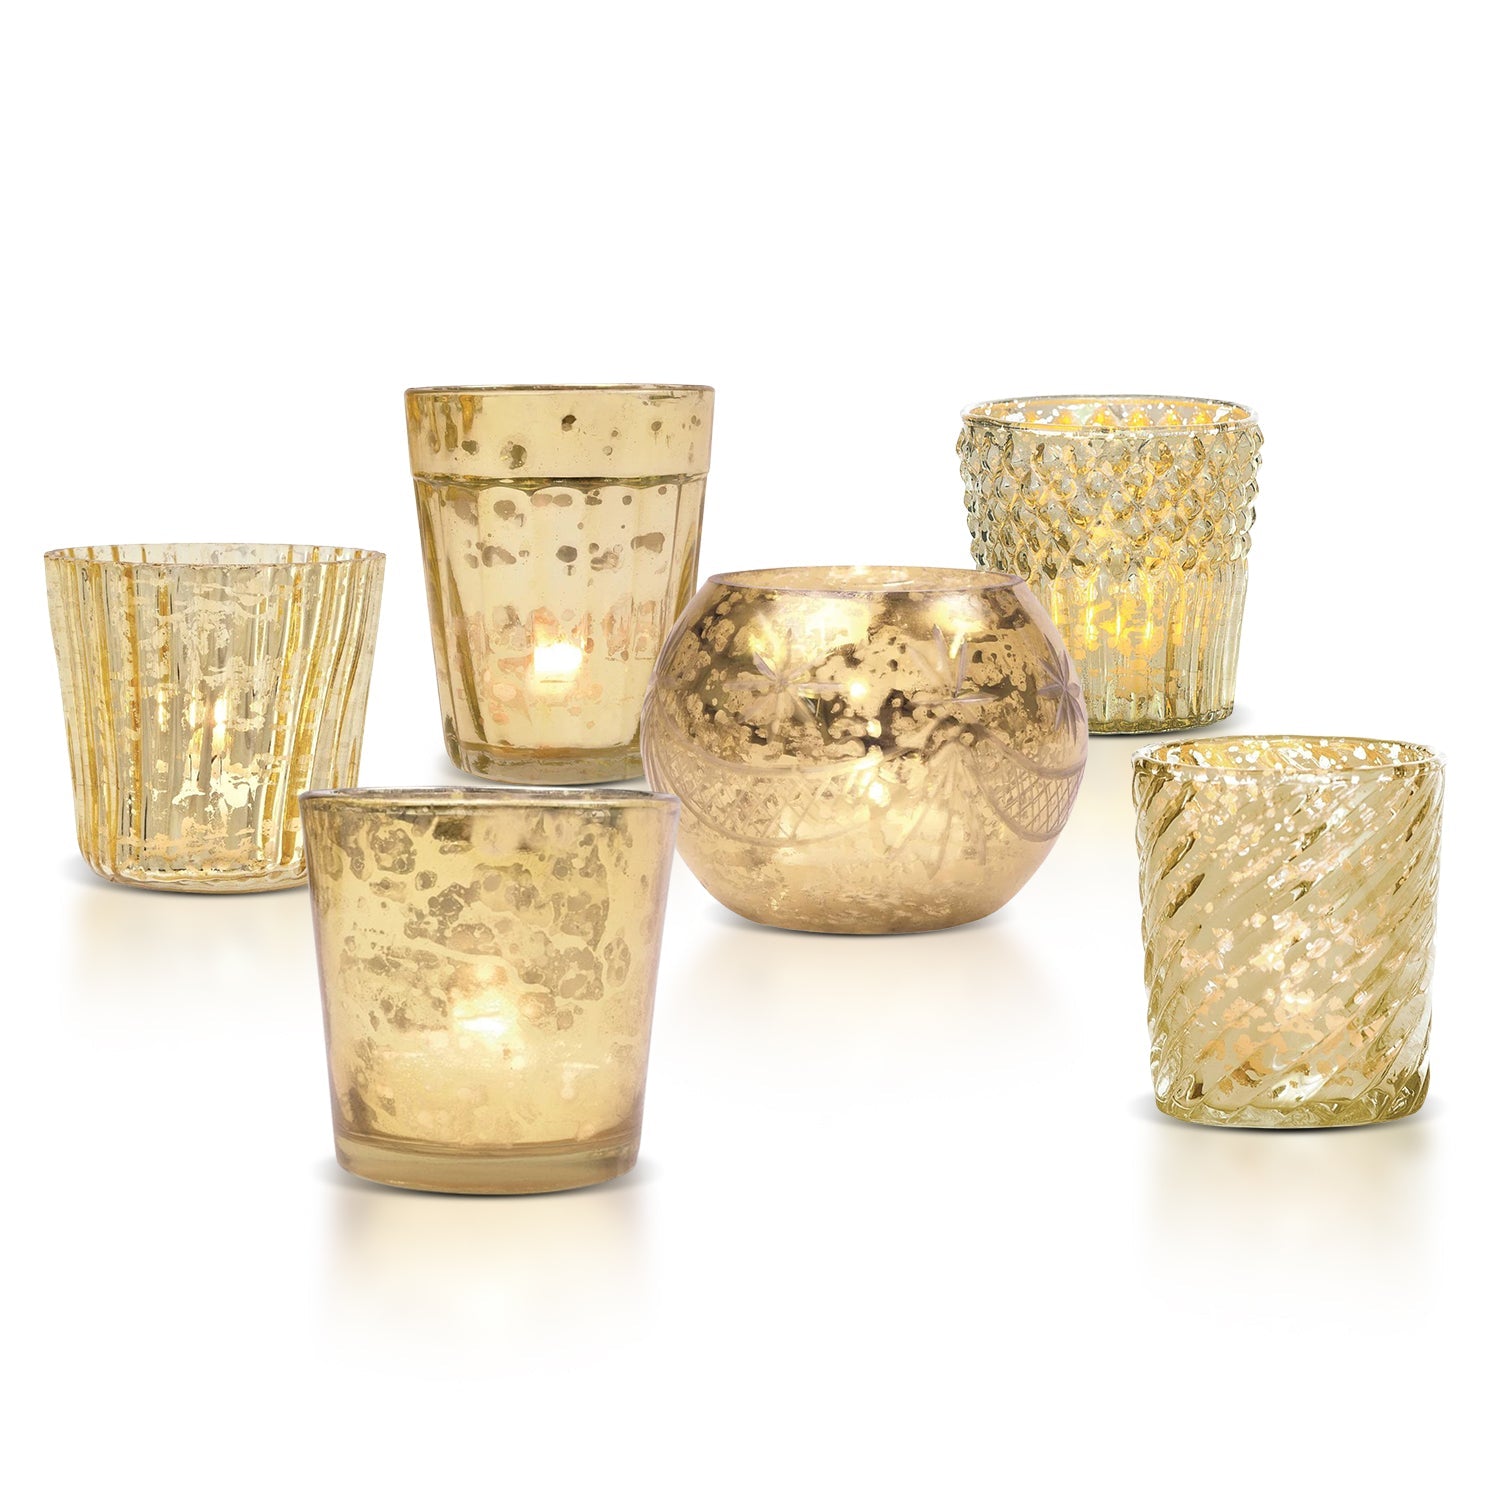 6 Pack | Vintage Mercury Glass Candle Holders (2.5-Inch, Lila Design, Liquid Motif, Gold) - for Use with Tea Lights - for Parties, Weddings and Homes